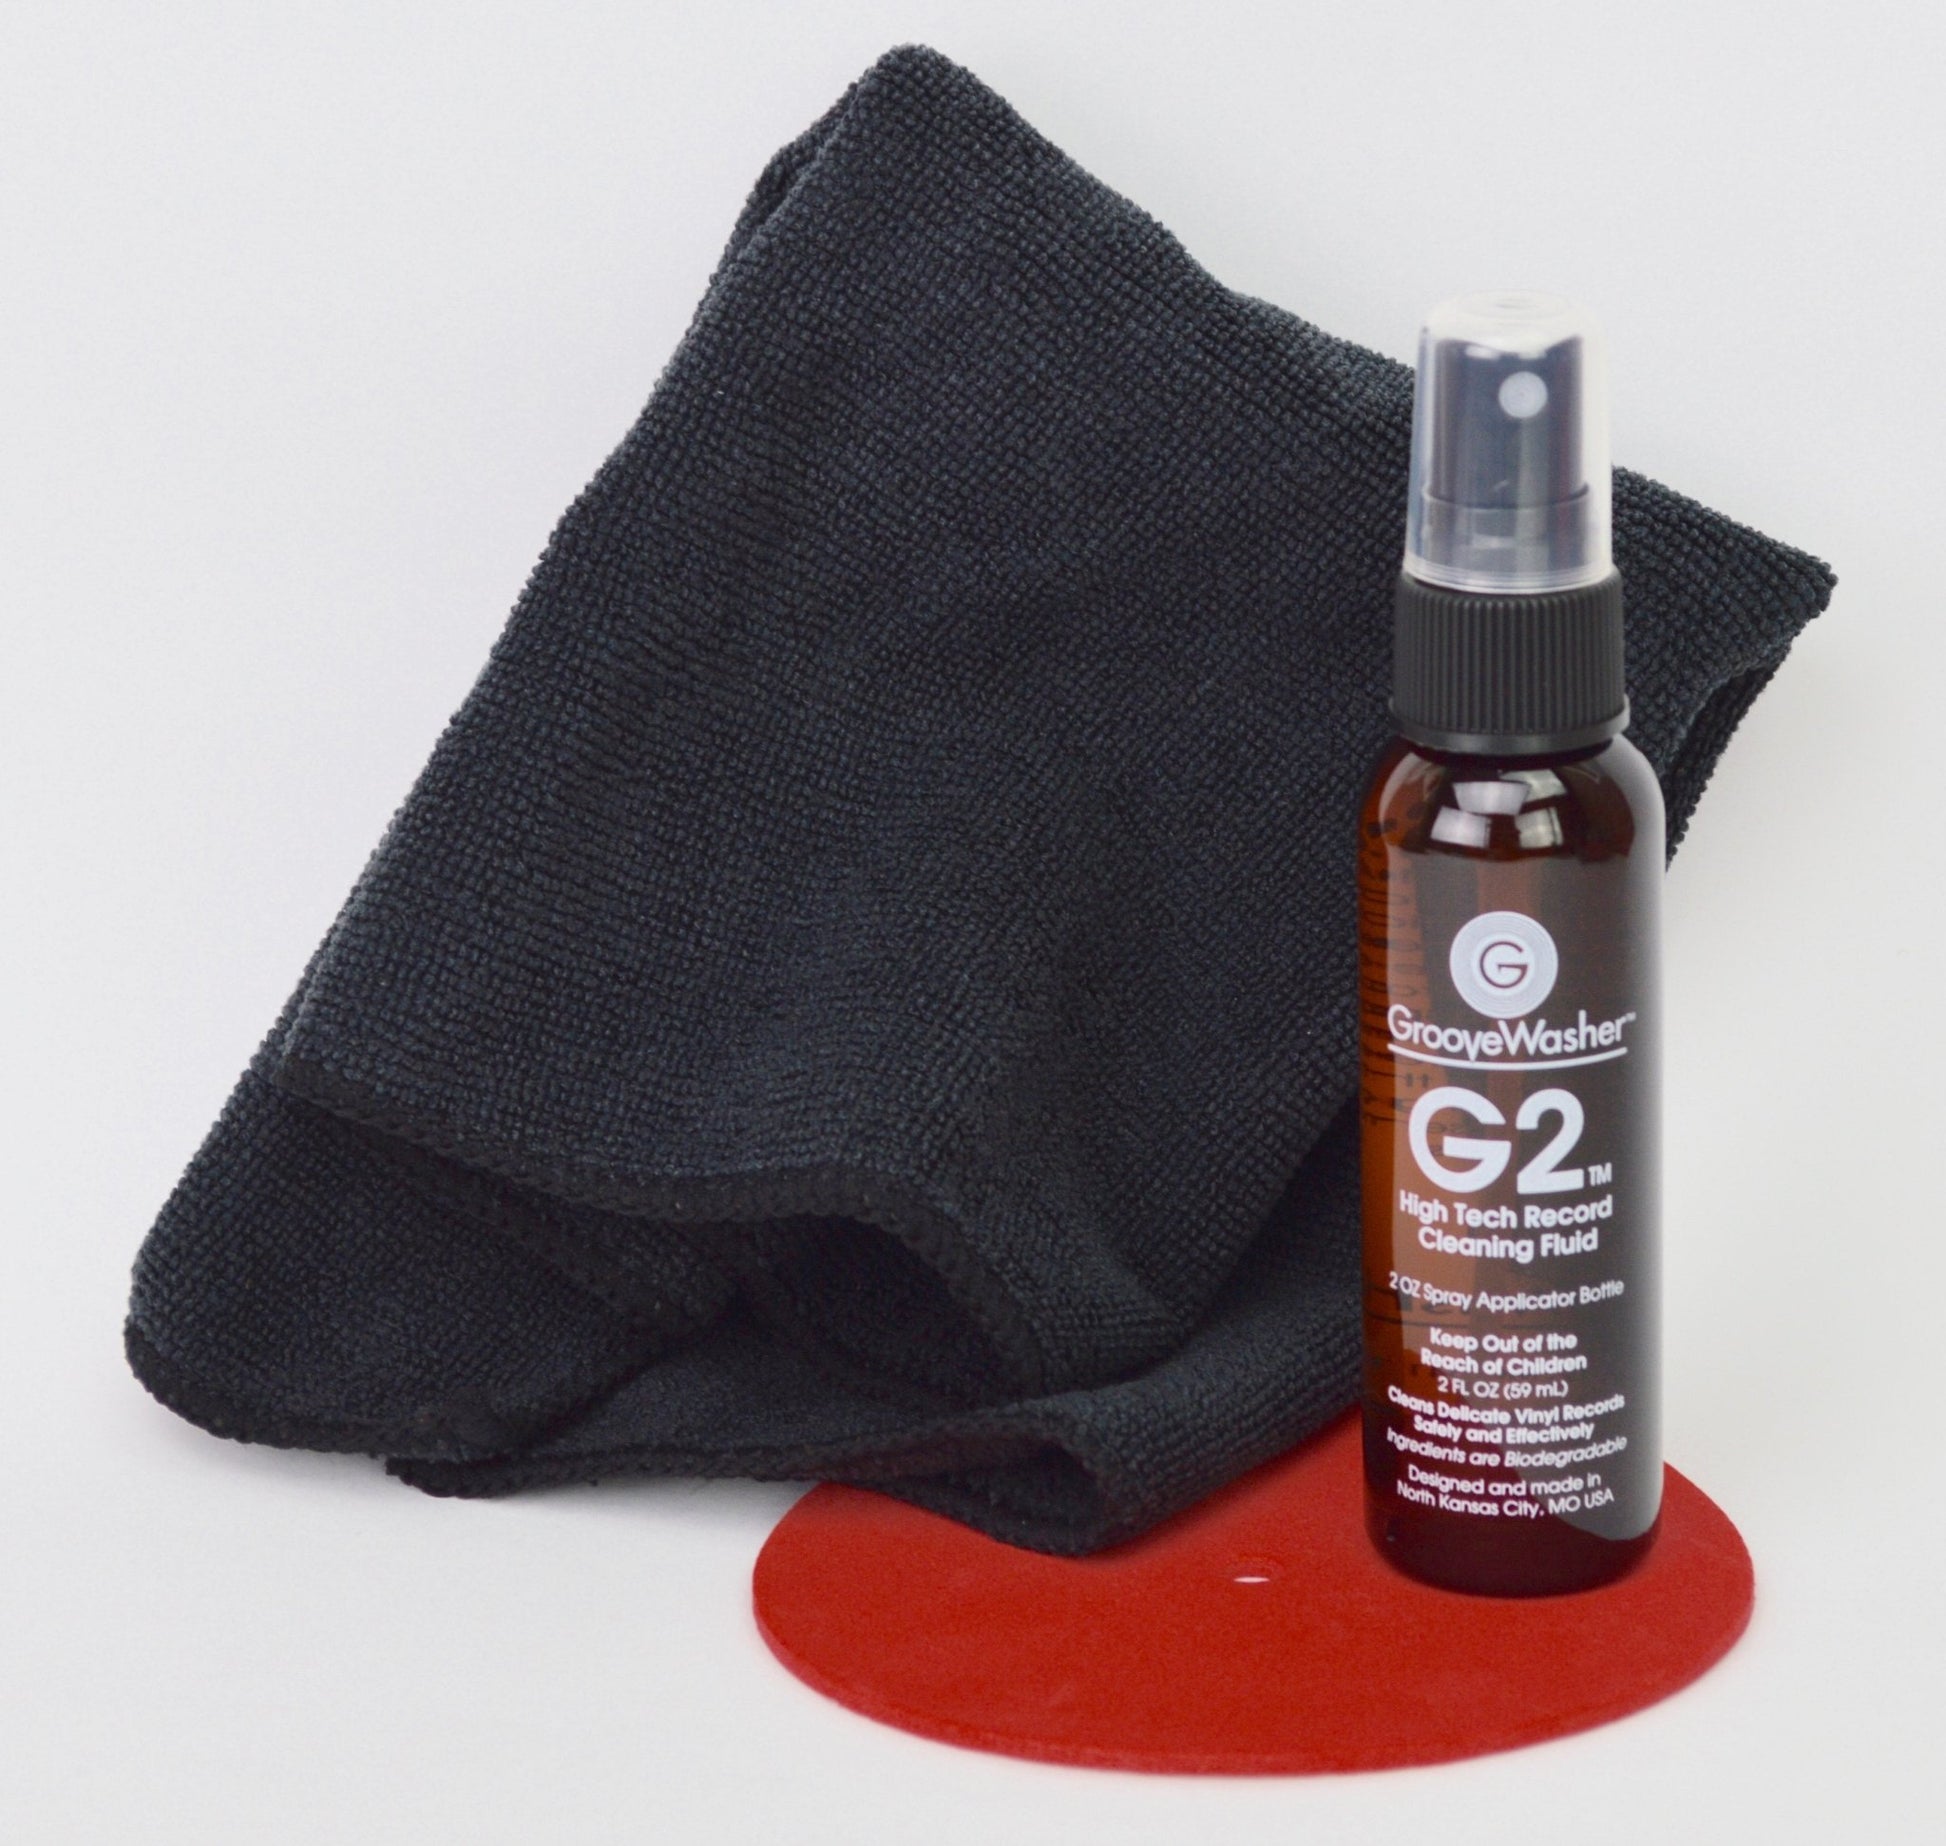 GrooveWasher - Commando Record Cleaning Kit (4oz G2 Fluid Mist Spray Bottle, 12''x12'' Black microfiber towel, Record Label Mask, instructions) - 856723007235 - Vinyl Accessories - Yellow Racket Records